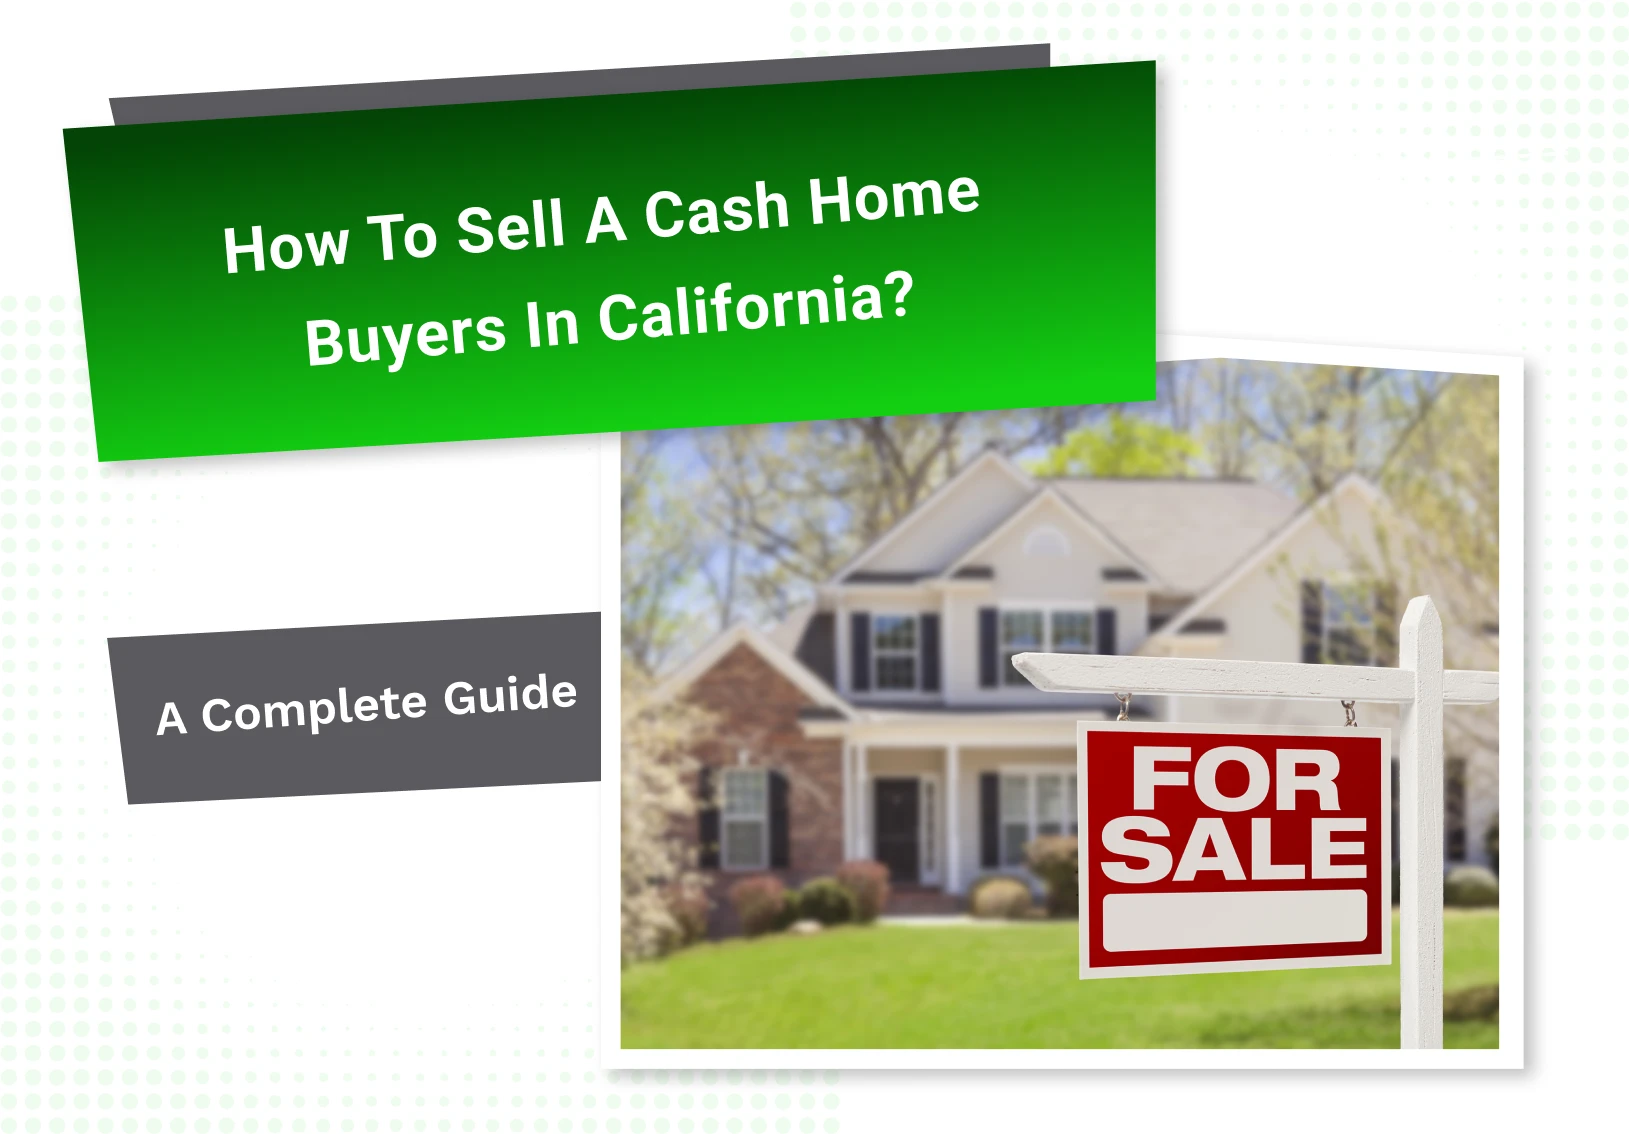 How to Sell Your House to Cash Home Buyers in California